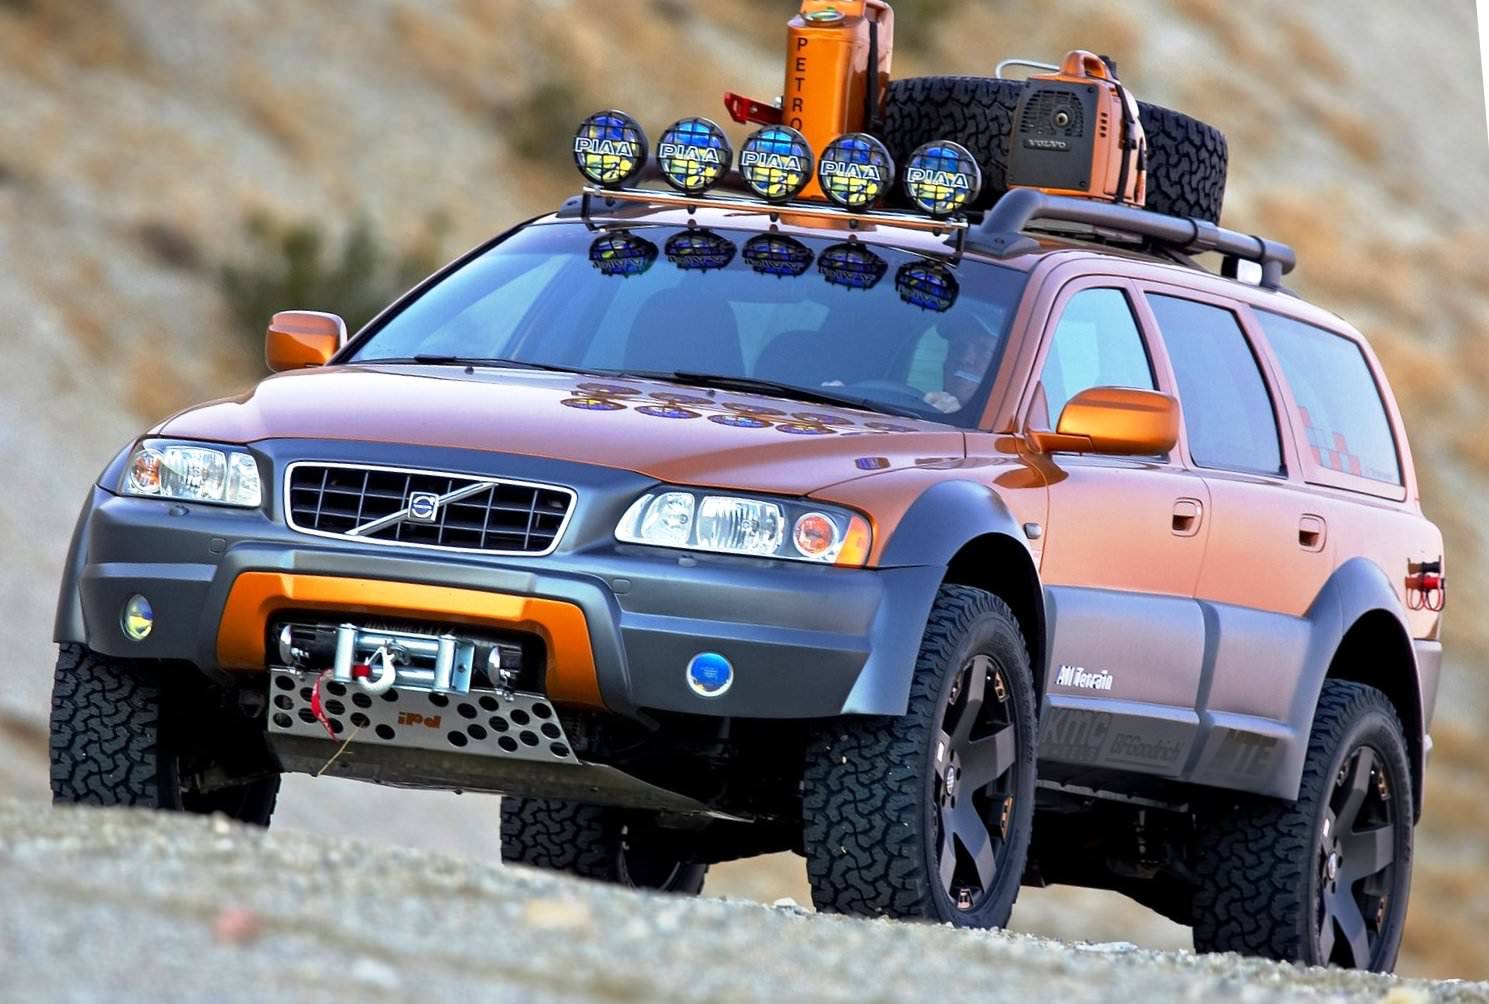 2005 Volvo XC70 AT and 2007 XC70 Surf Rescue are California Surf'n'Turf  Dreams 2